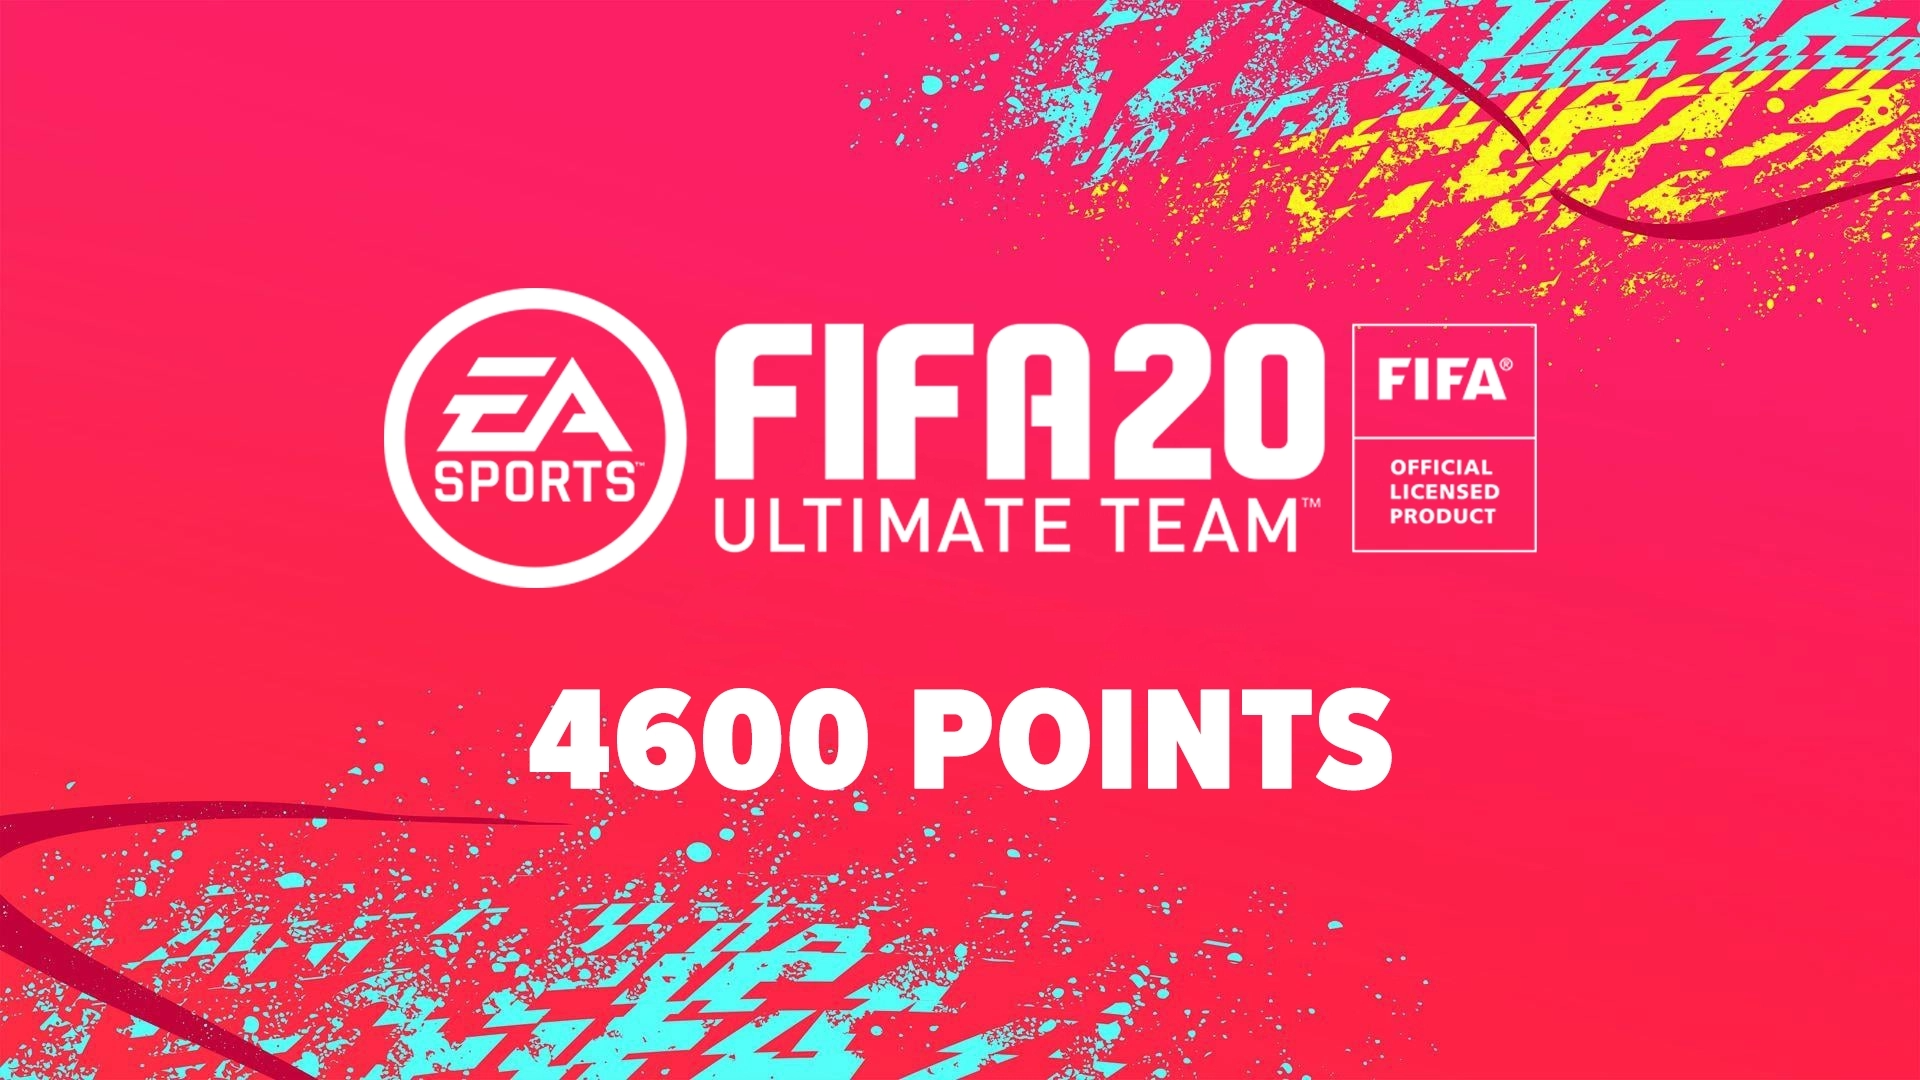 FIFA 20 ULTIMATE TEAM 4600 POINTS - Xbox One